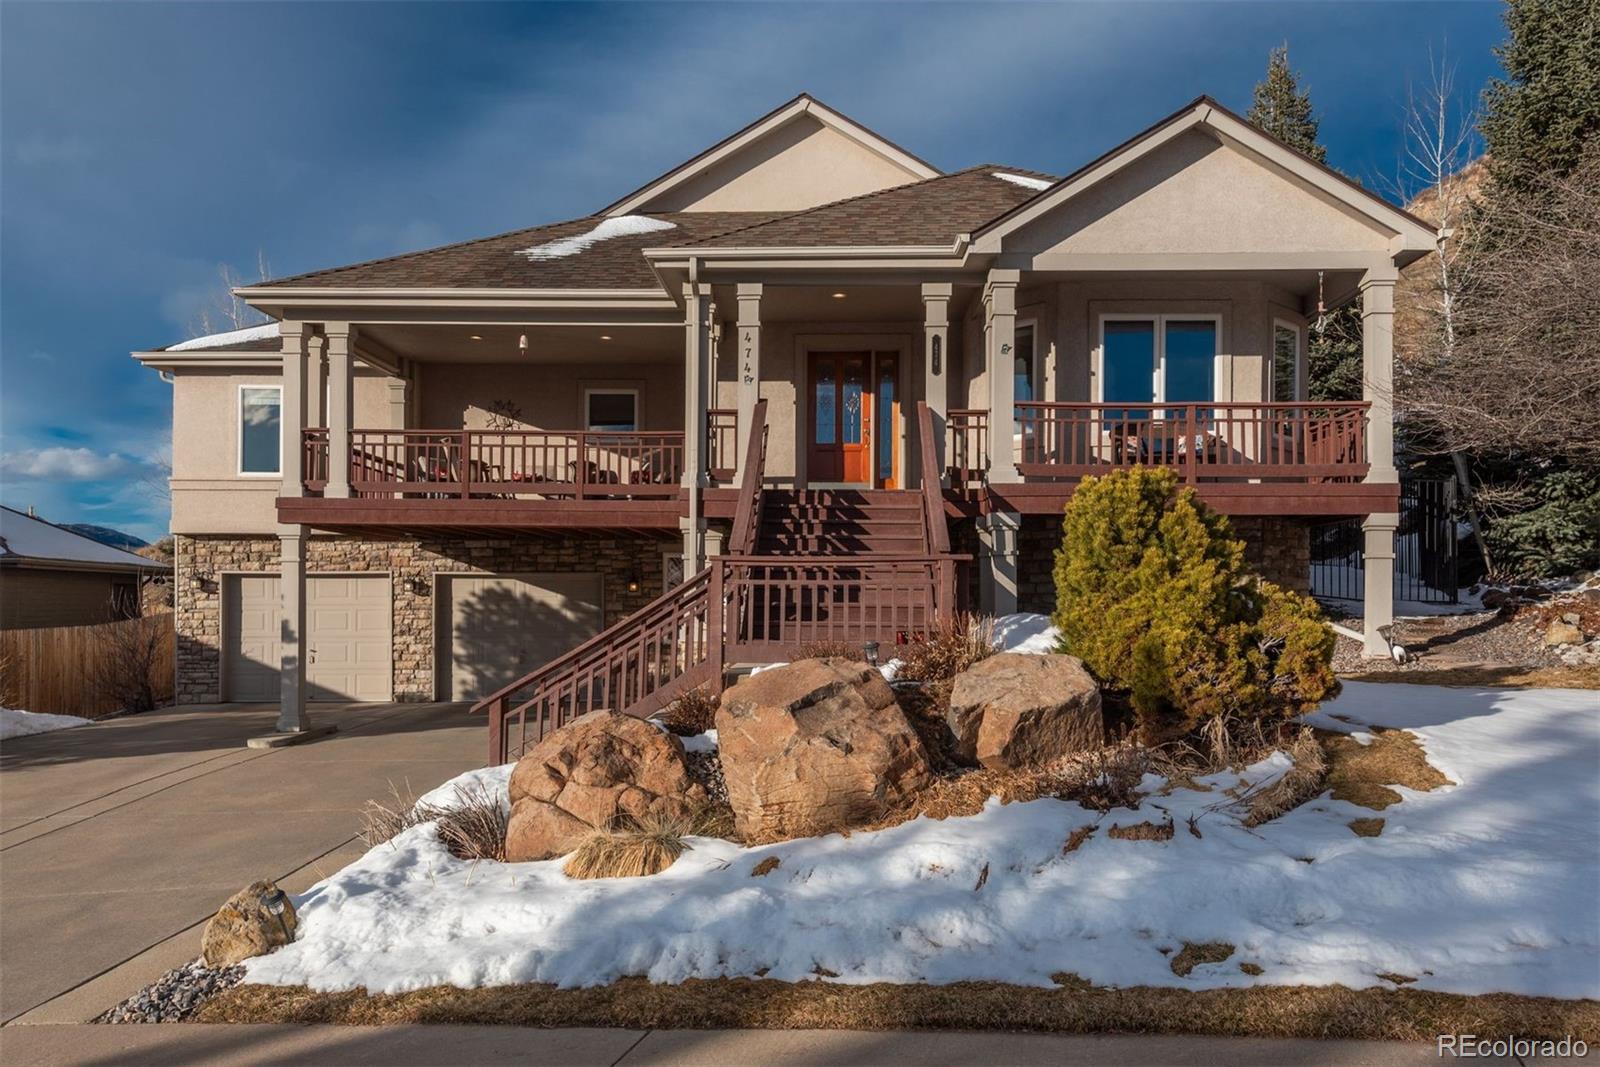 Report Image for 474  Wyoming Circle,Golden, Colorado